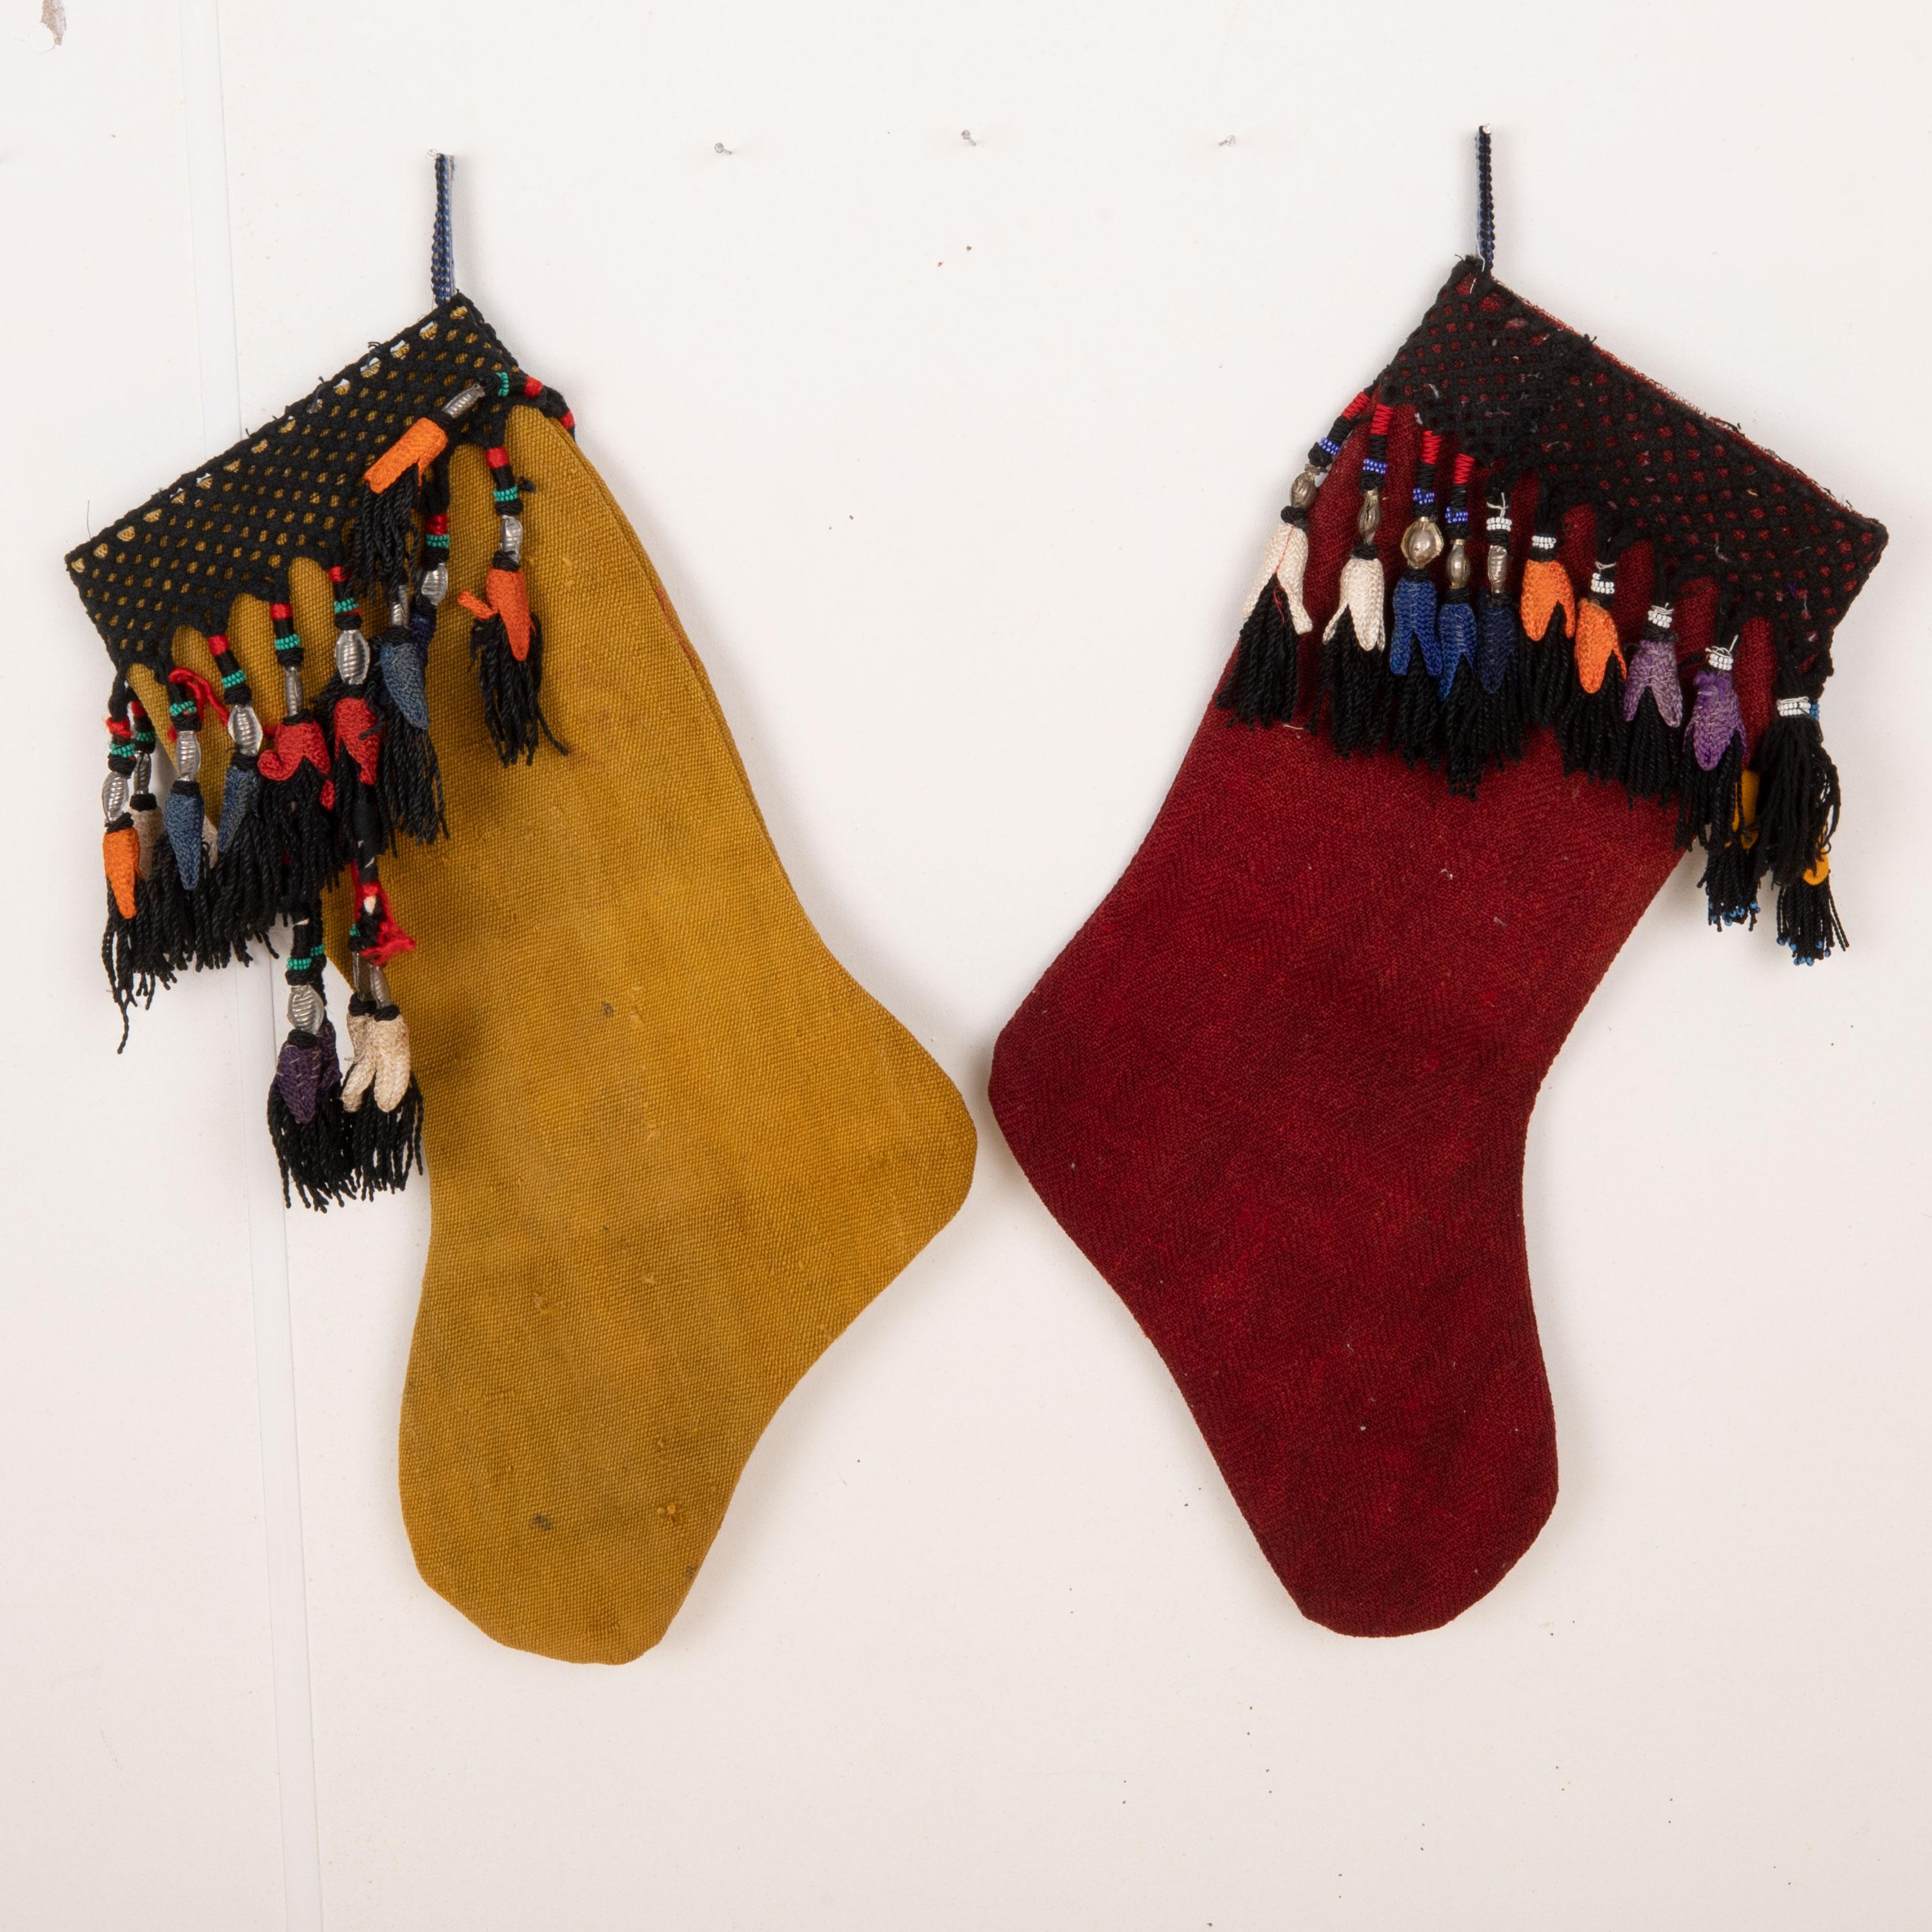 These Christmas Stockings were made from mid 20th C. Perde Cover Fragments.

Please note these were made from vintage Perde fragments
